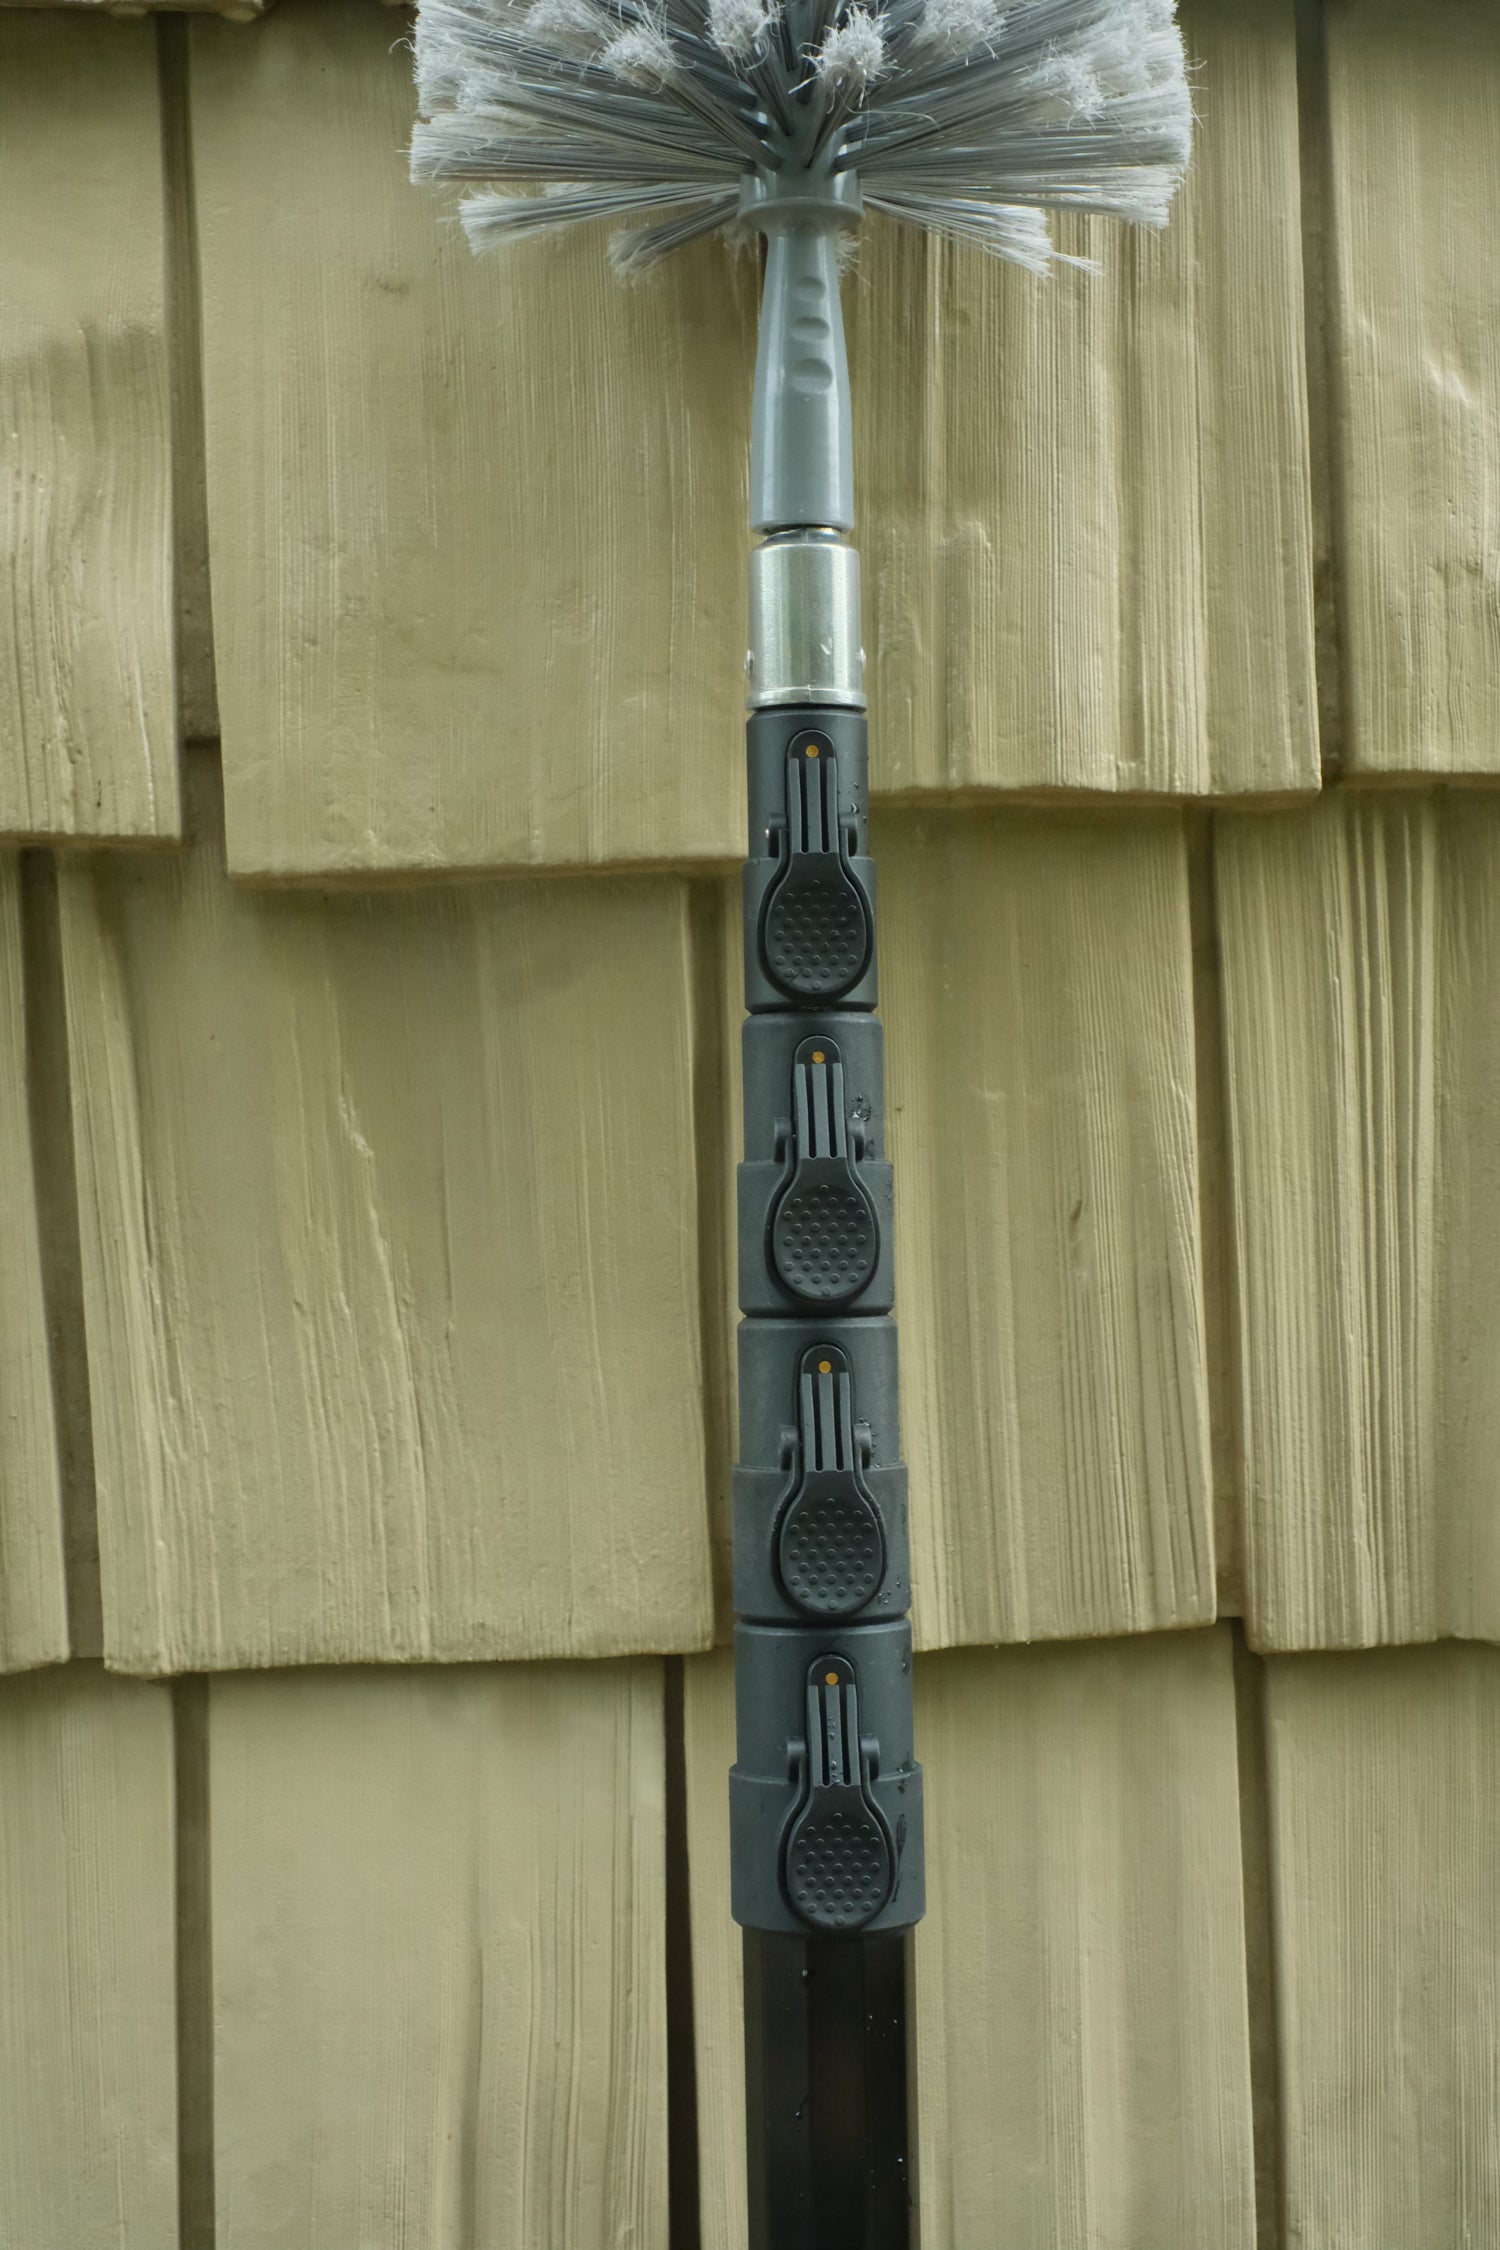 SOLD OUT - Black Ops 18' Pole - Pre-order now